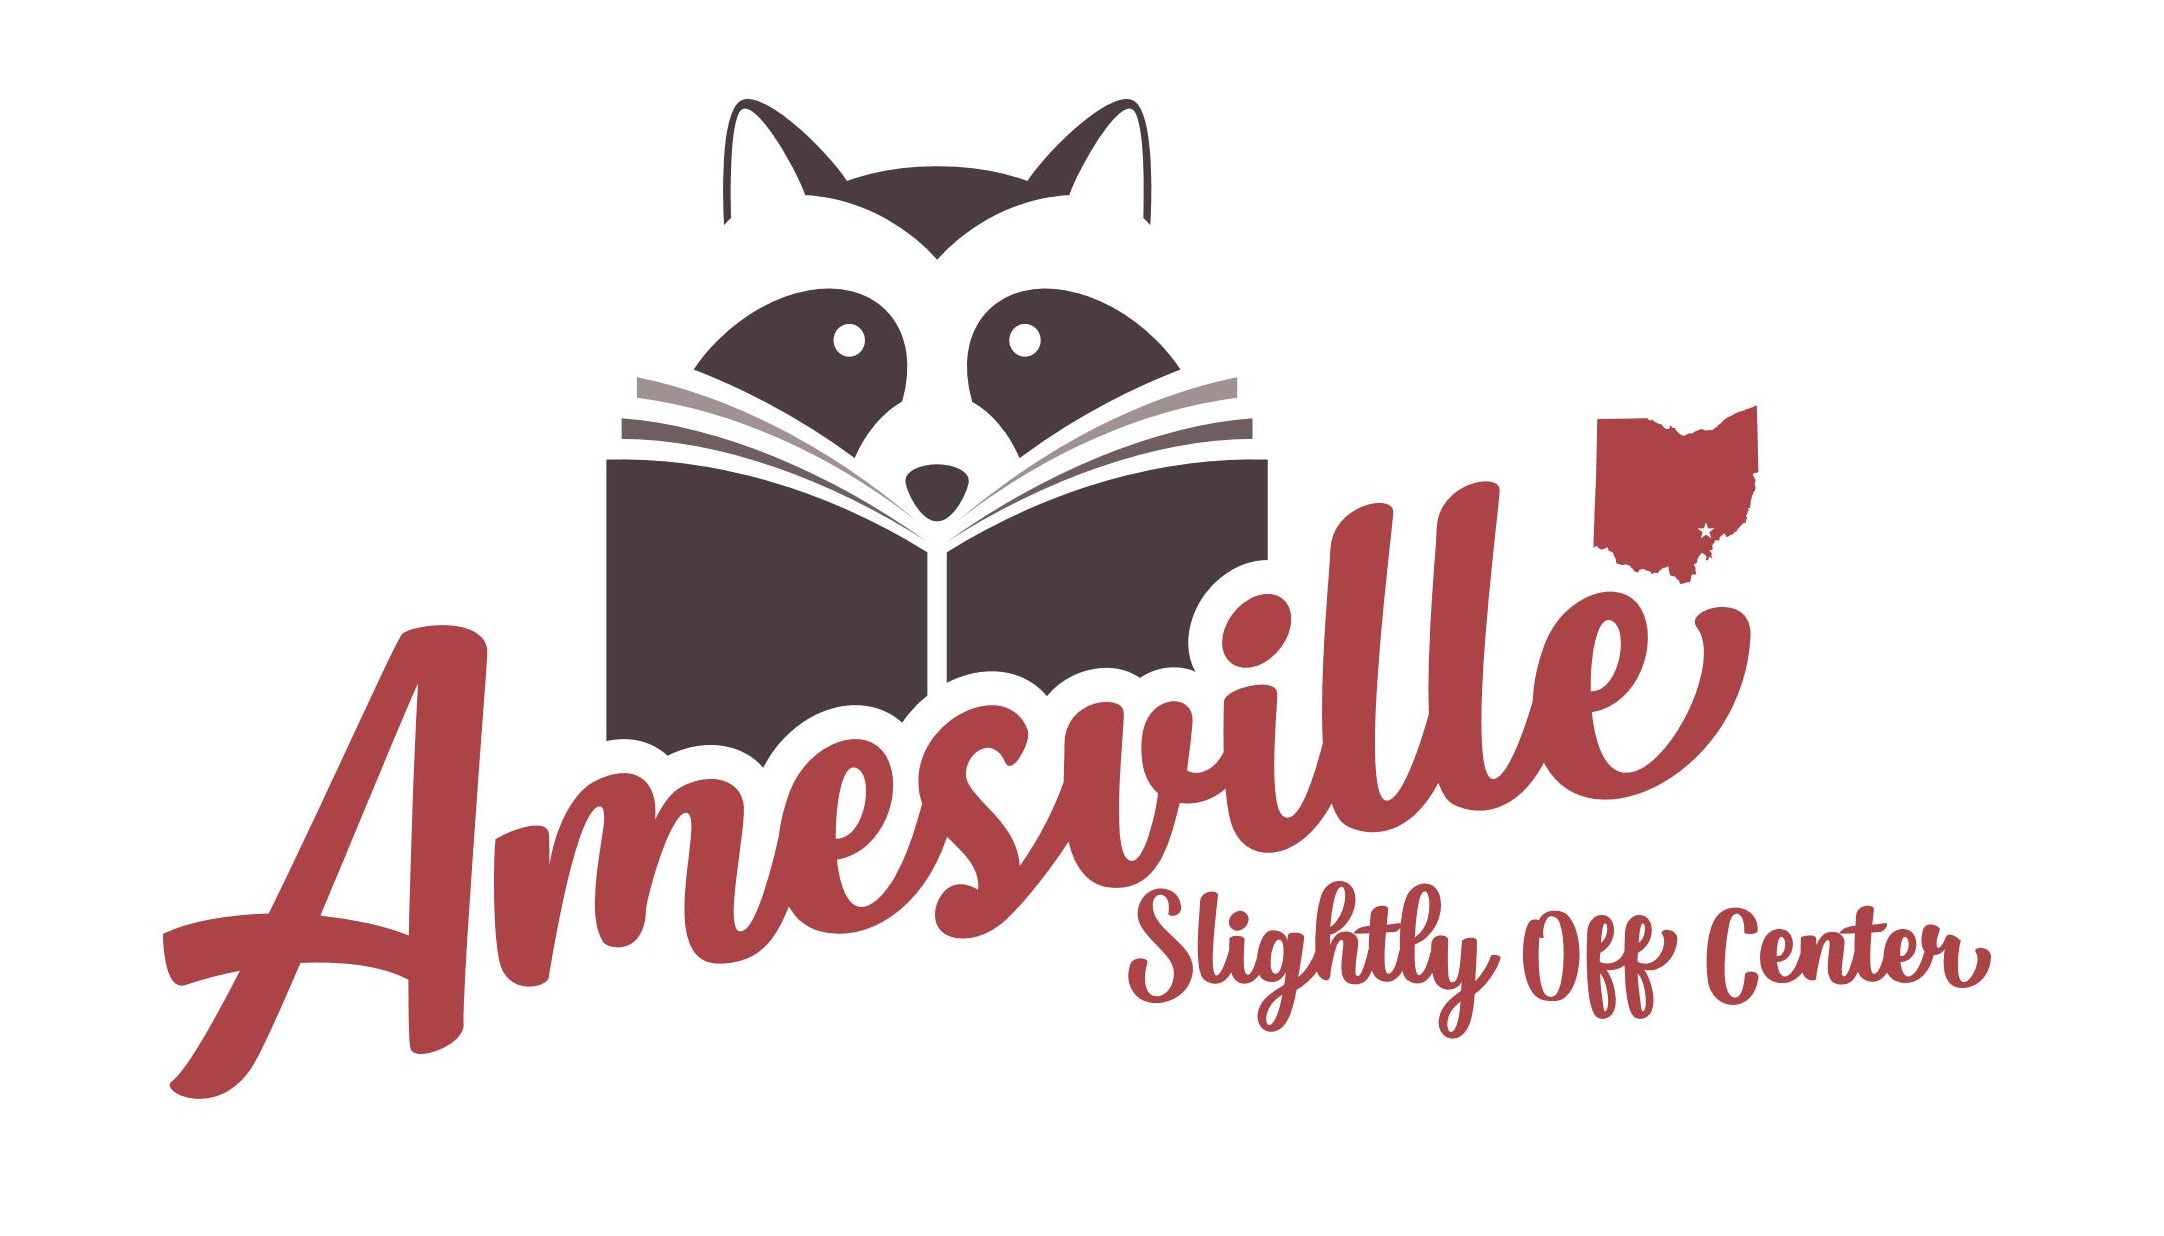 An image of the Amesville logo.